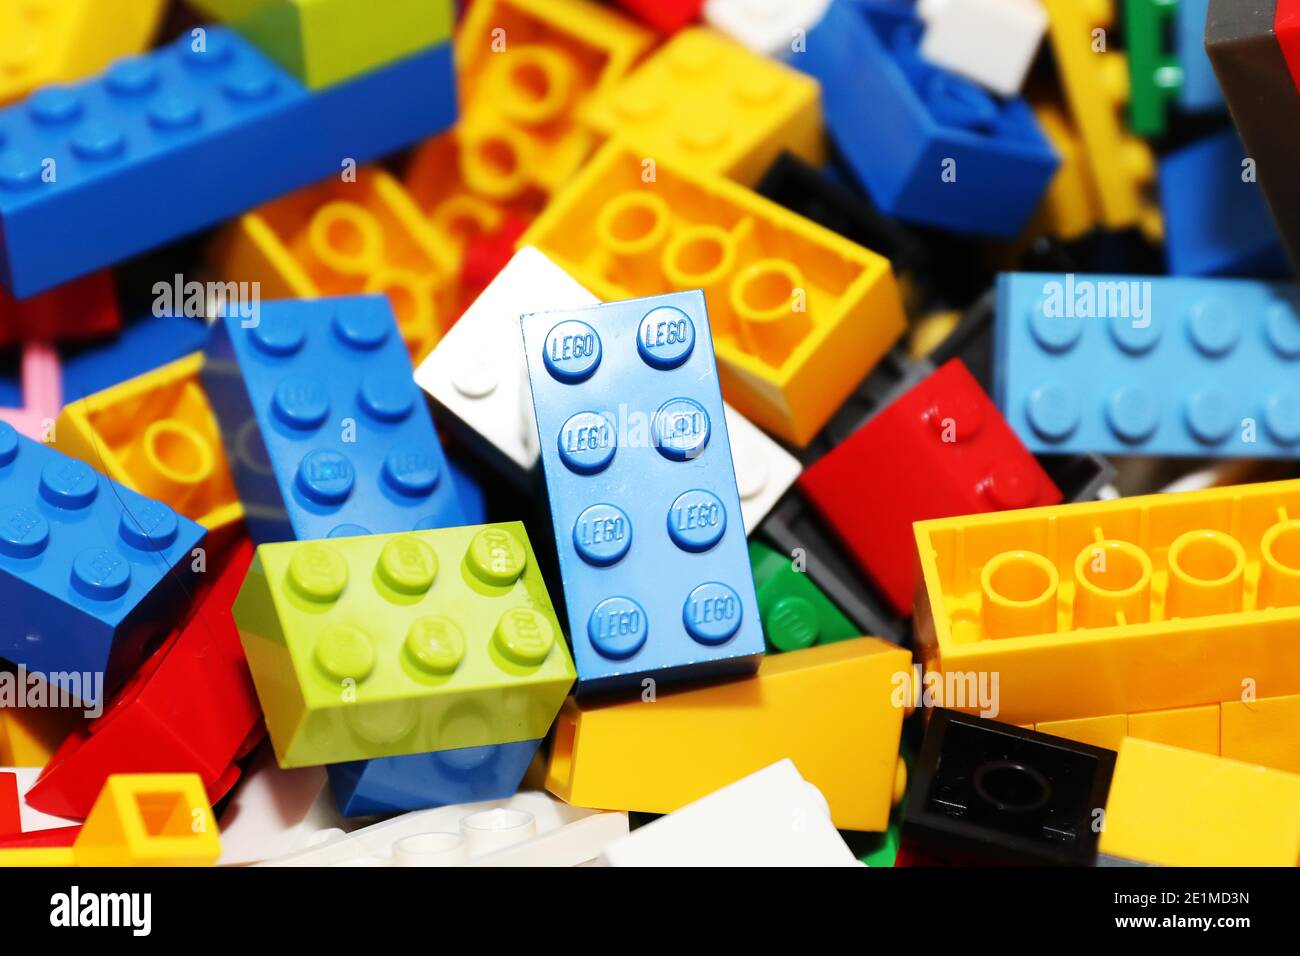 Lego Building Blocks  Picture by Antony Thompson - Thousand Word Media, NO SALES, NO SYNDICATION. Contact for more information mob: 07775556610 web: w Stock Photo